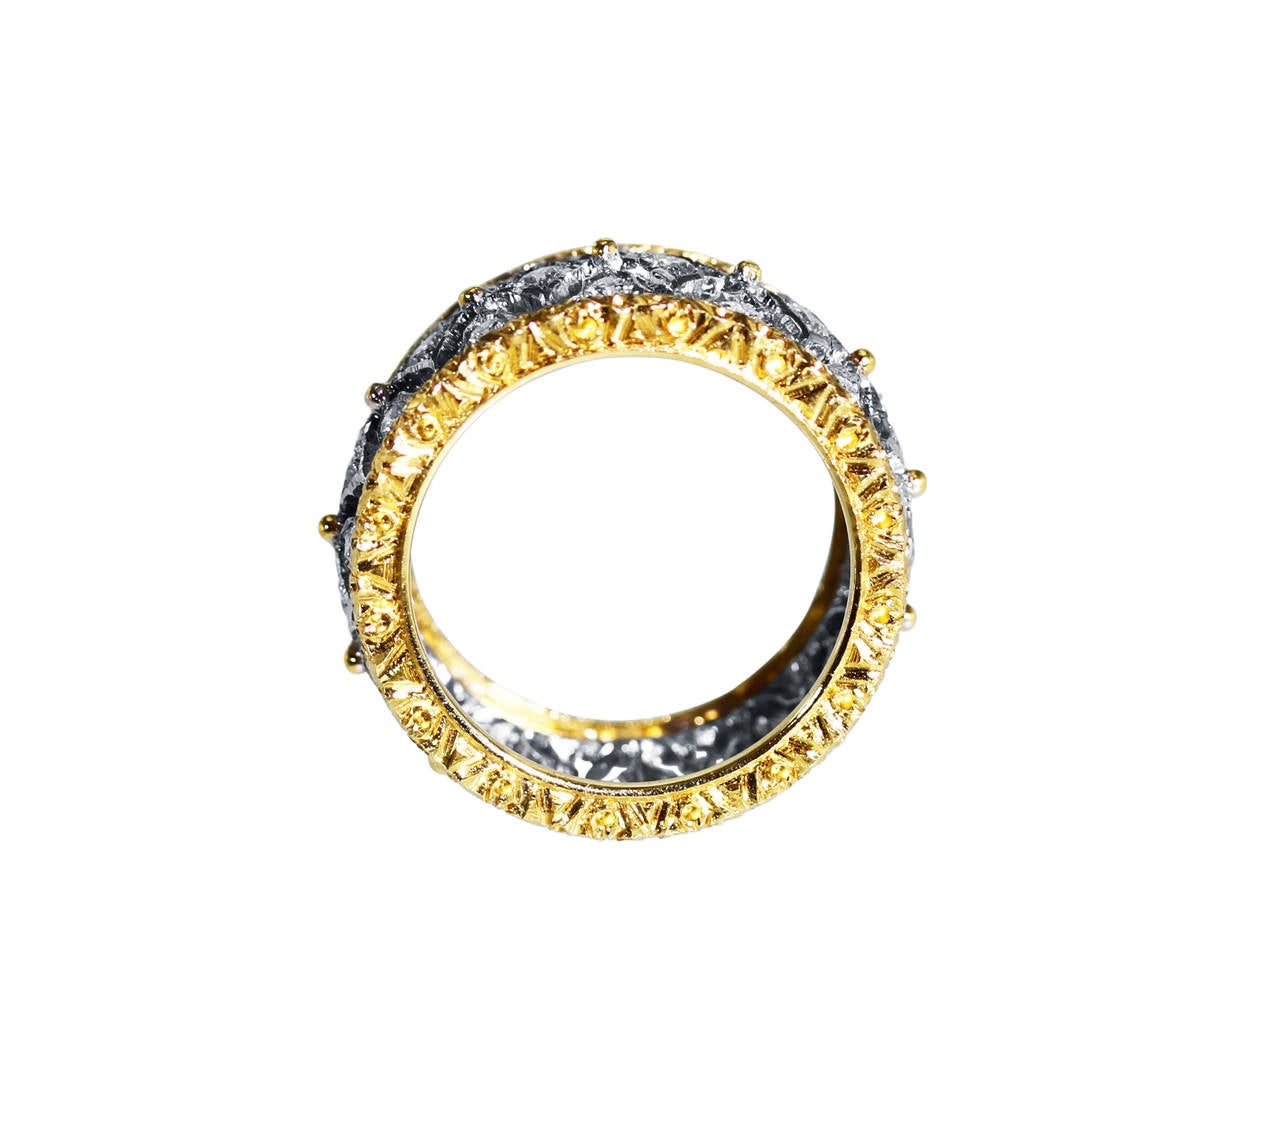 An 18 karat white and yellow gold and diamond band ring by Buccellati, Italy, the pierced openwork gold band set with 39 round diamonds weighing approximately 1.00 carat, gross weight 8.3 grams, size 6, signed M Buccellati, Italy, stamped 750.